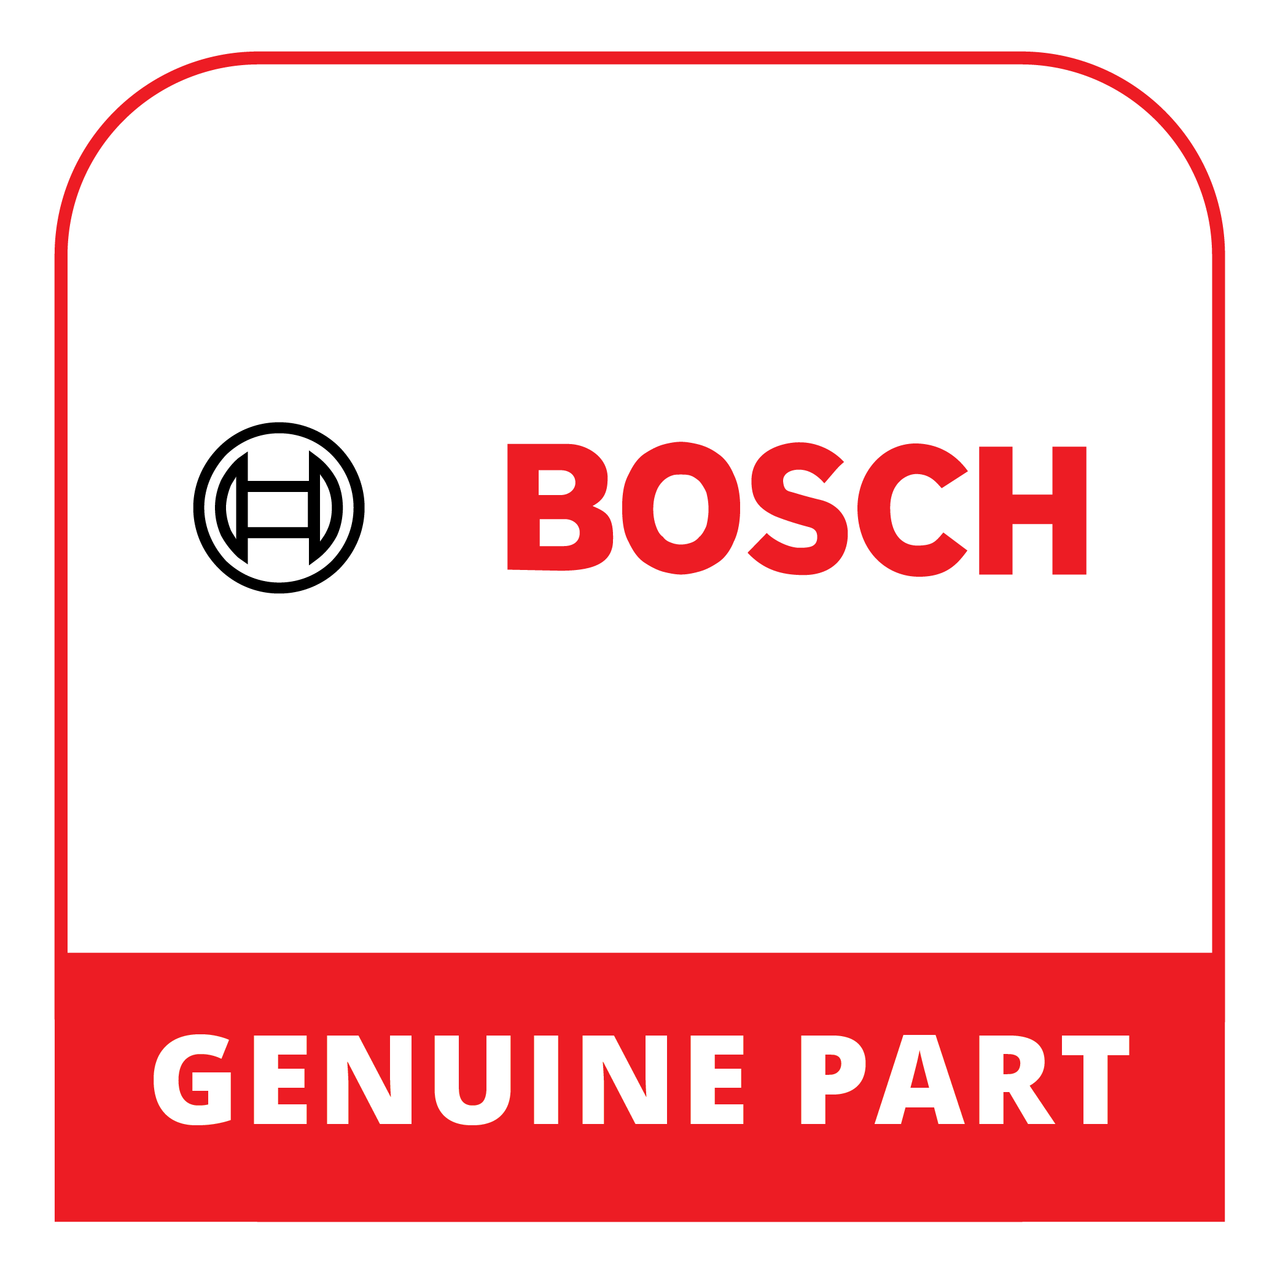 Bosch (Thermador) 12028954 - Power Module Programmed - Genuine Bosch (Thermador) Part